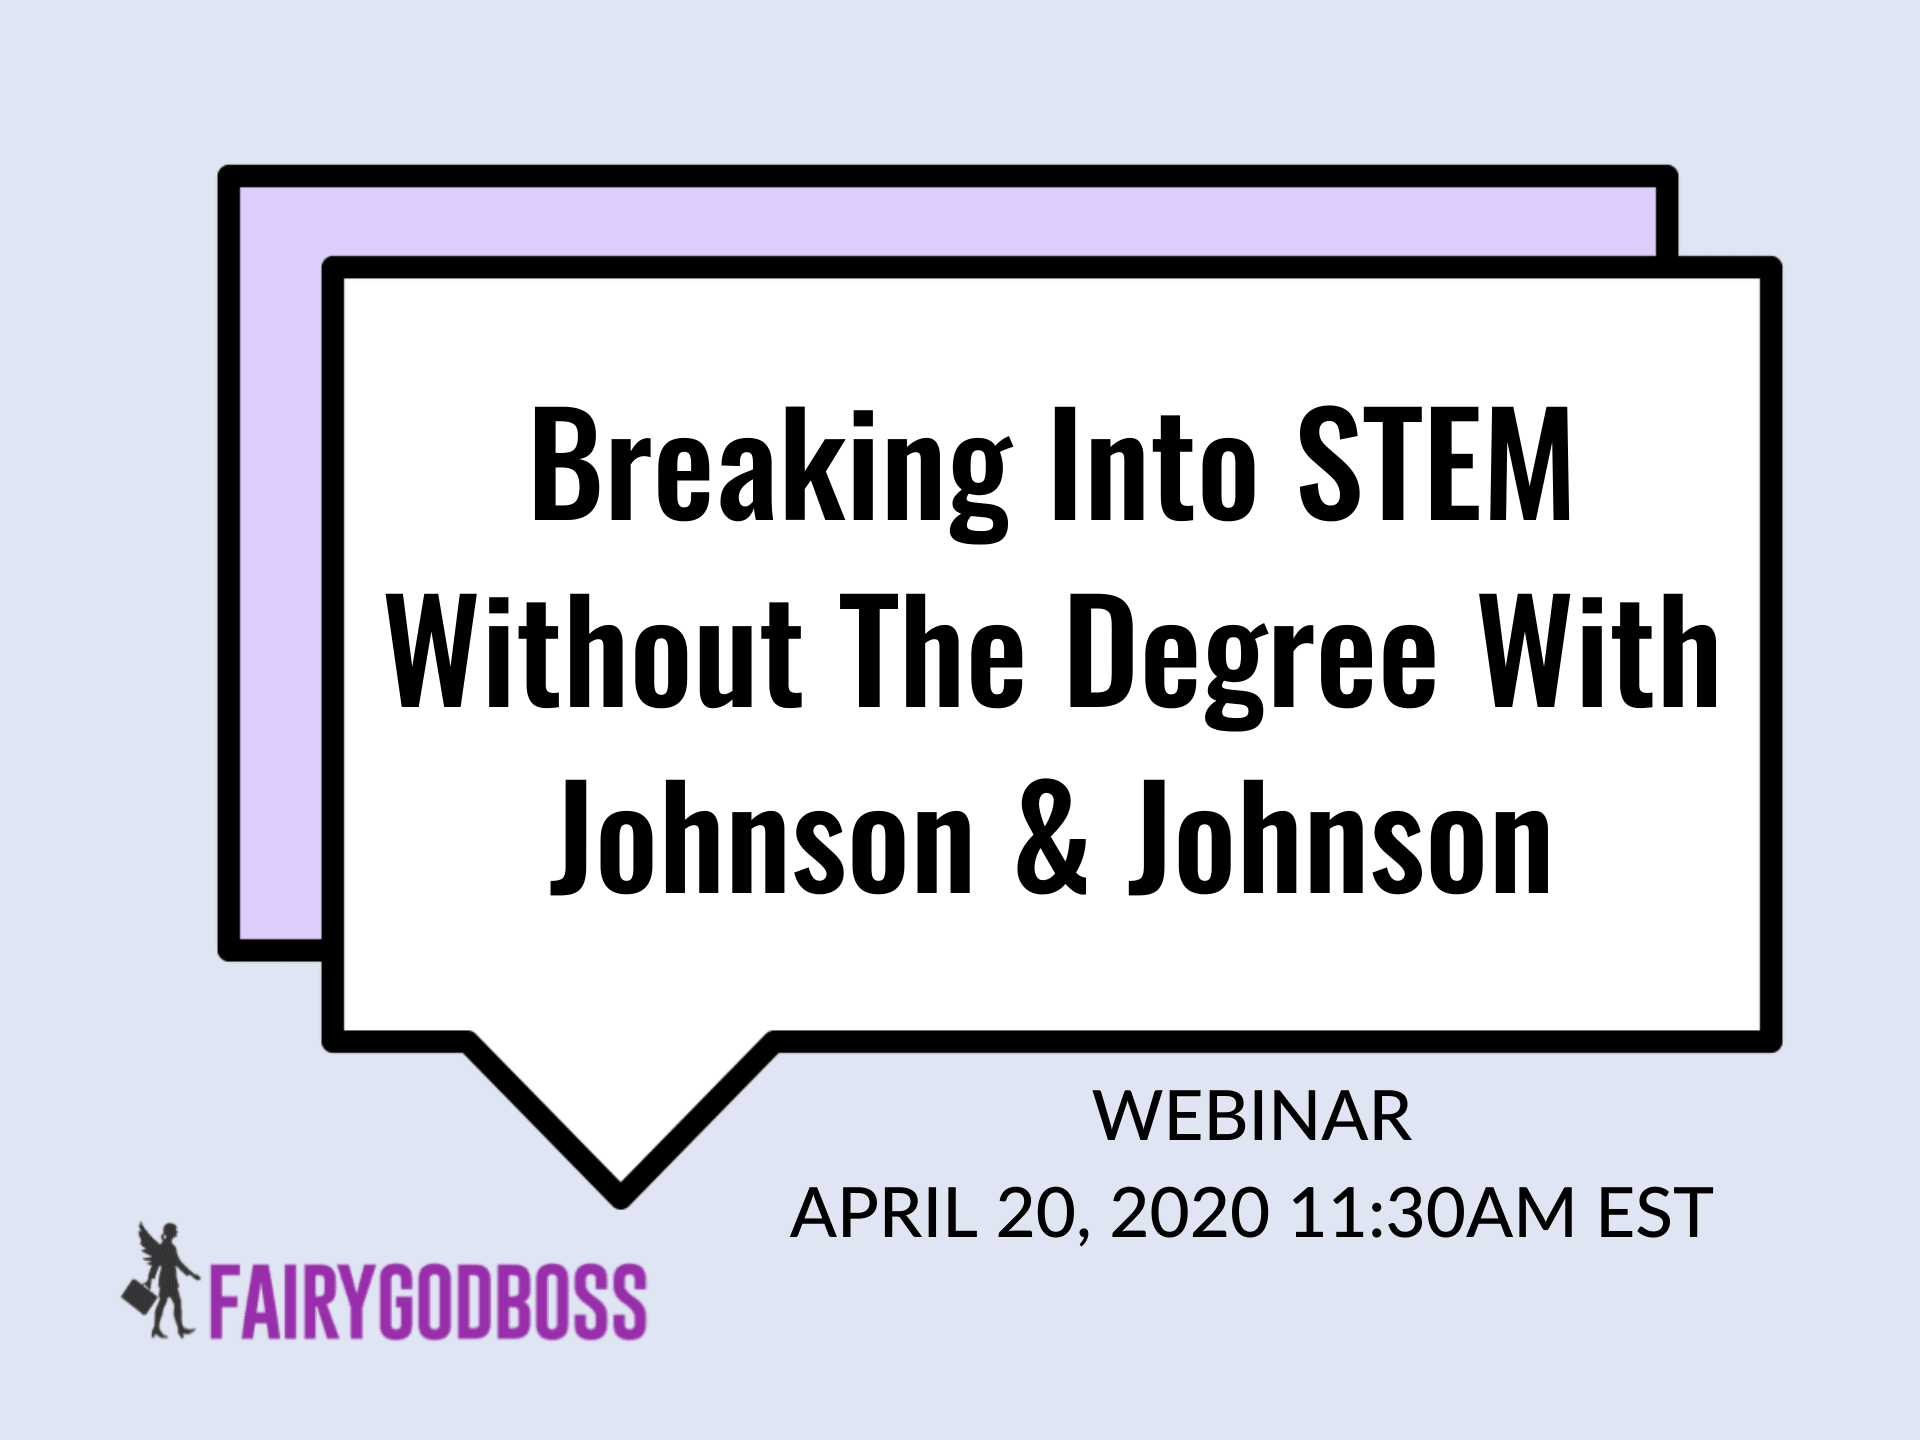 Breaking Into STEM Without The Degree With Johnson & Johnson